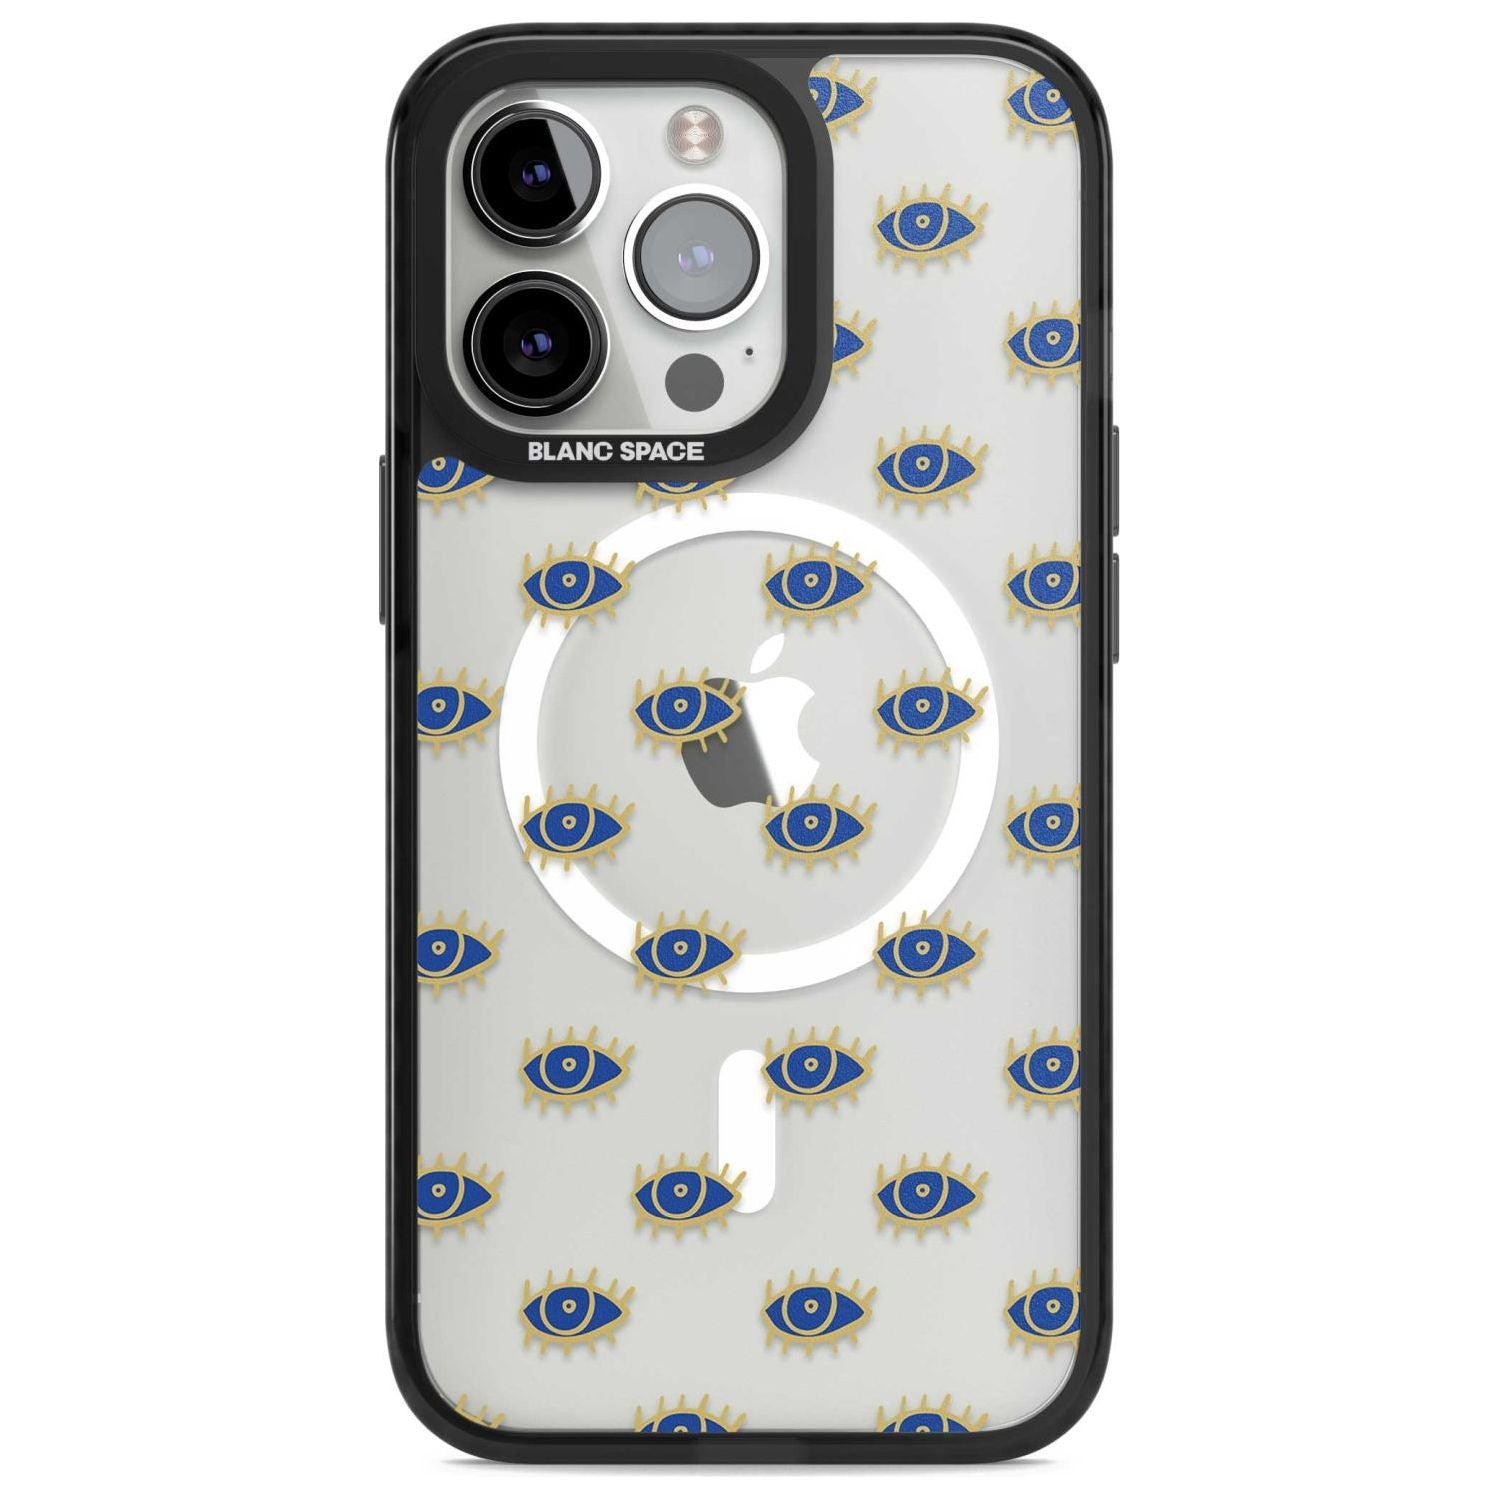 Gold Eyes (Clear) Psychedelic Eyes Pattern Phone Case iPhone 15 Pro Max / Magsafe Black Impact Case,iPhone 15 Pro / Magsafe Black Impact Case,iPhone 14 Pro Max / Magsafe Black Impact Case,iPhone 14 Pro / Magsafe Black Impact Case,iPhone 13 Pro / Magsafe Black Impact Case Blanc Space